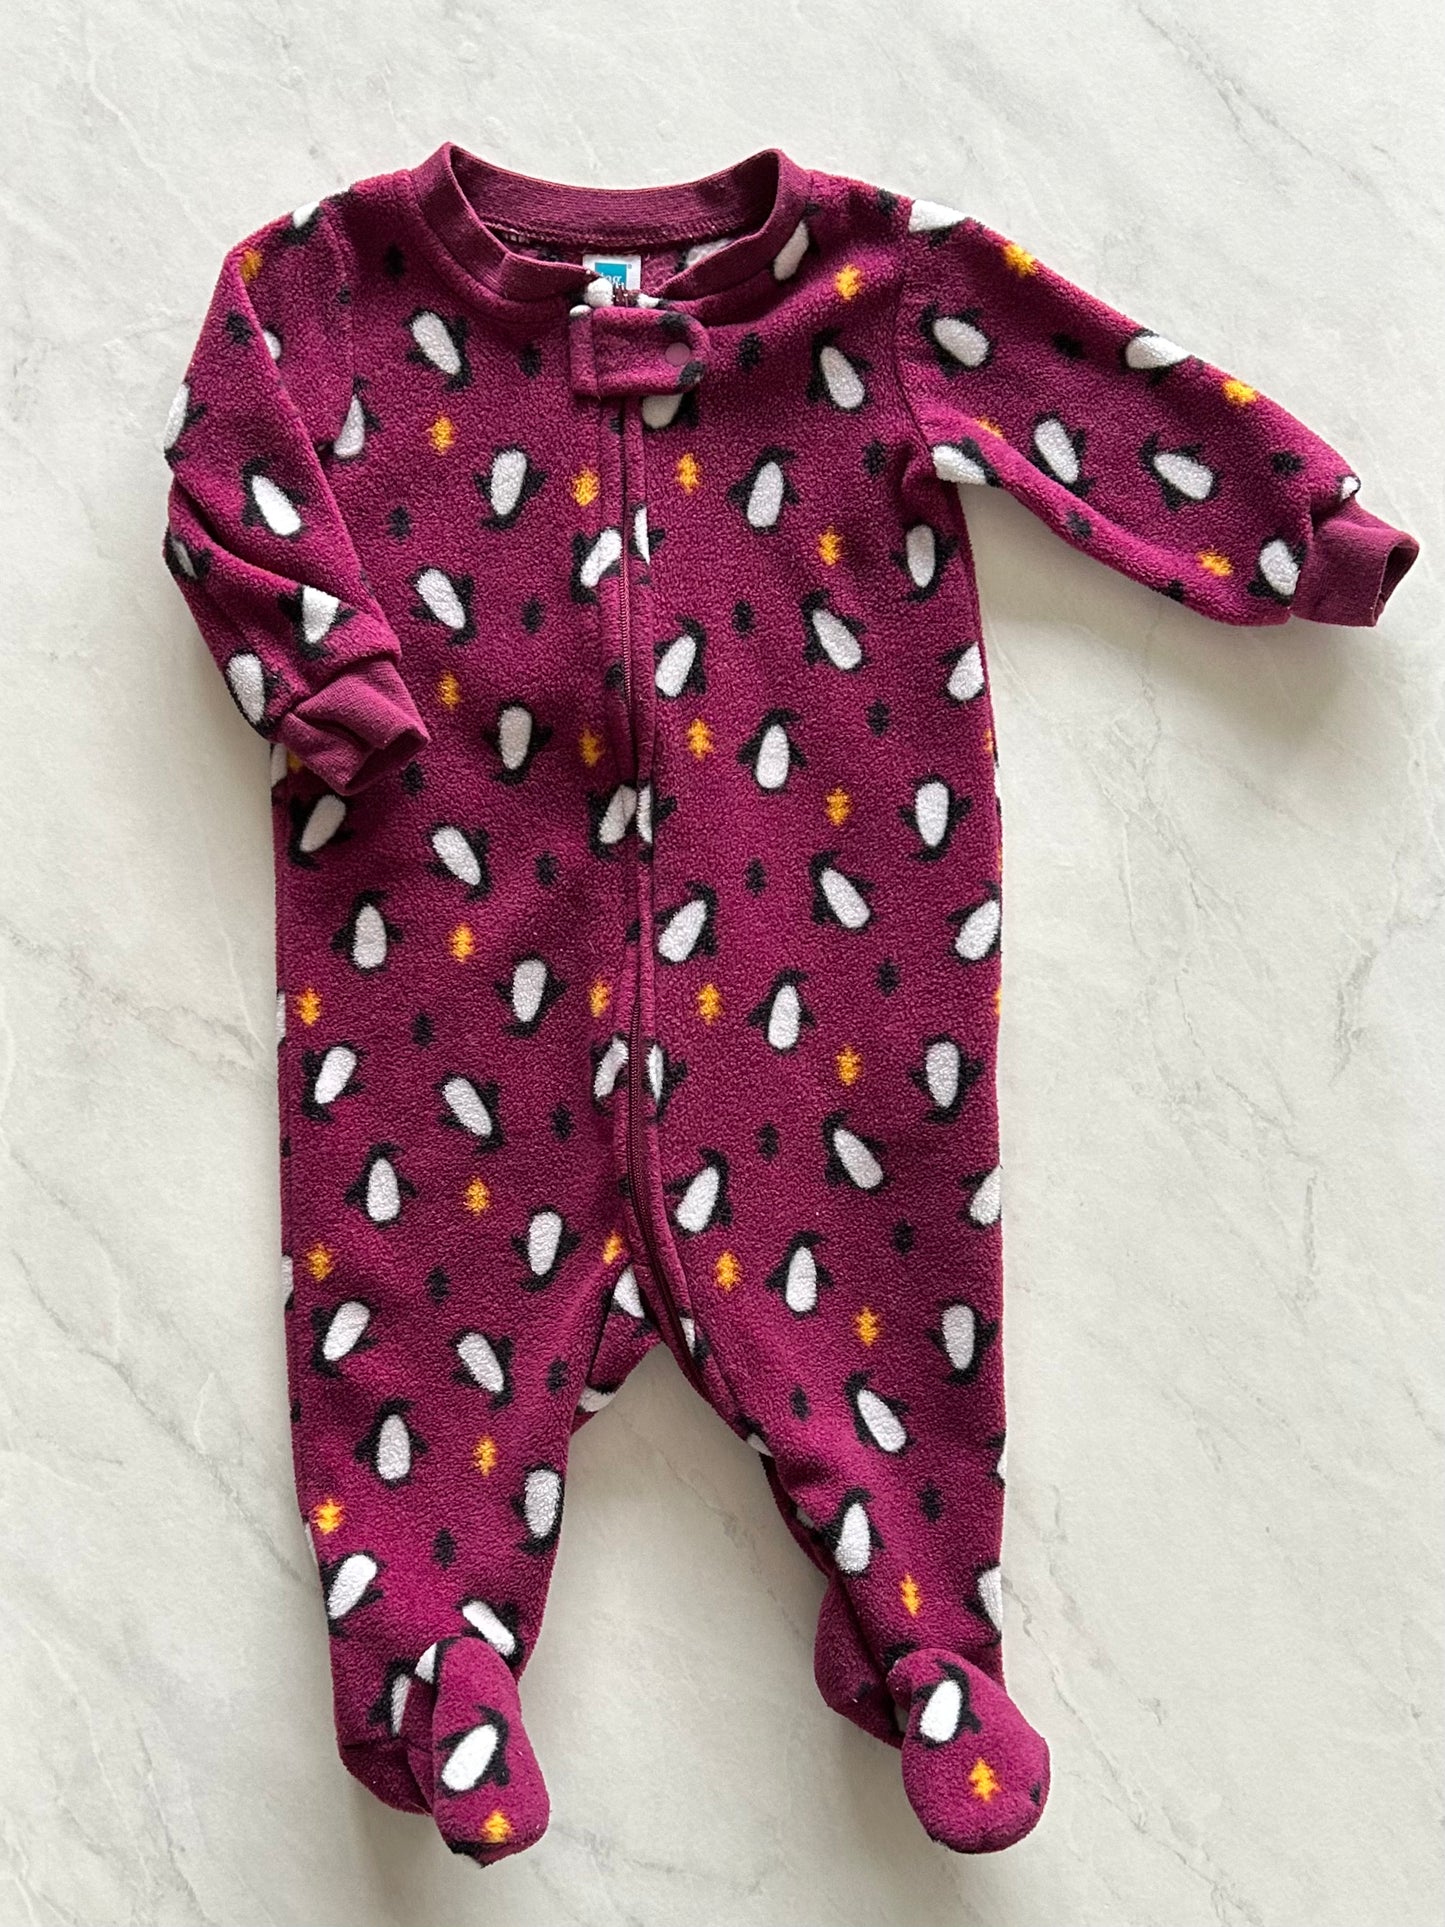 *Imperfect* Fleece footed pajamas - Tag - 3 months